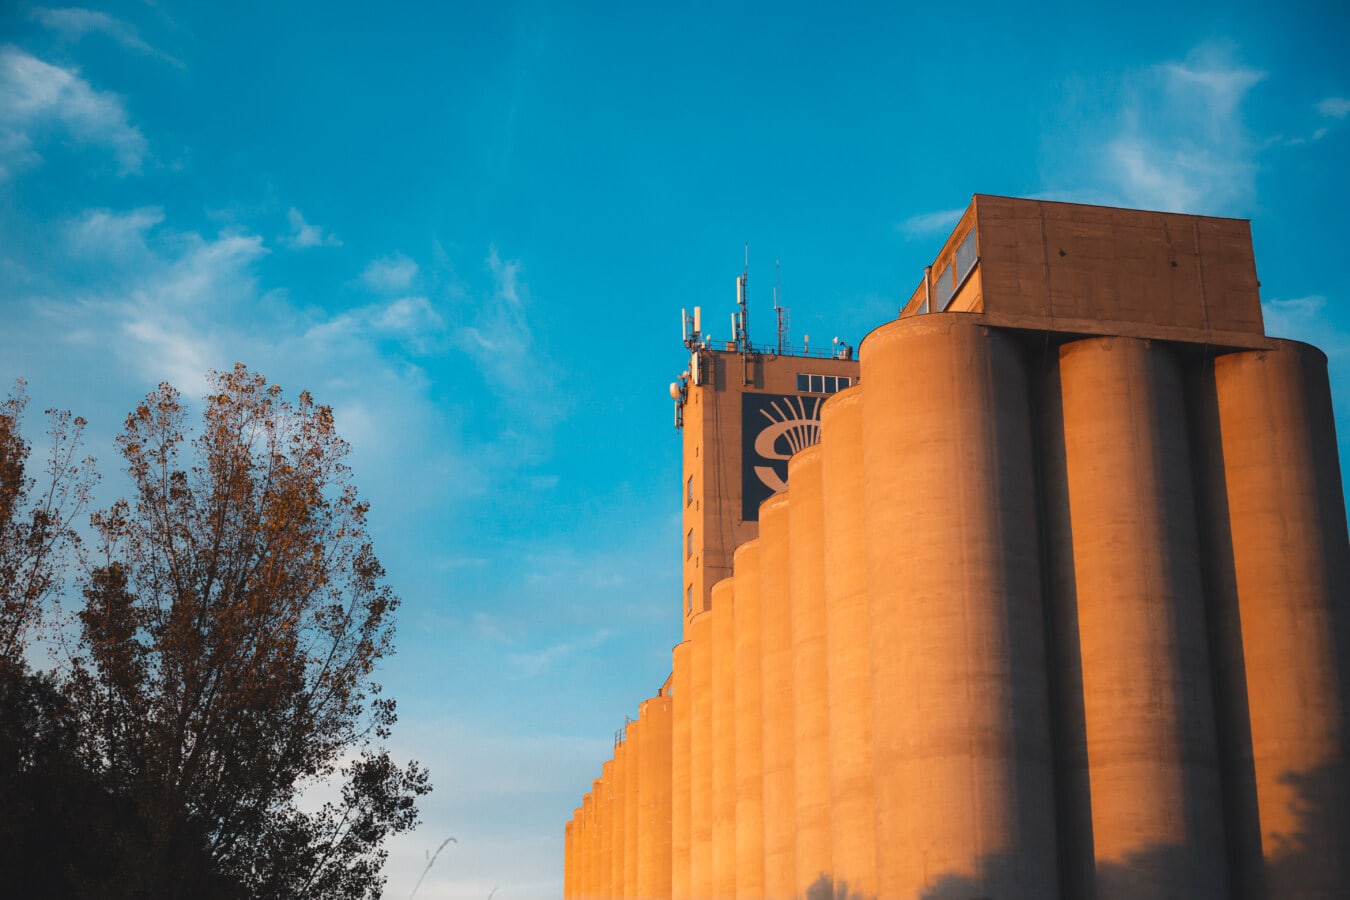 silo, high, building, walls, concrete, factory, industry, architecture, outdoors, tower